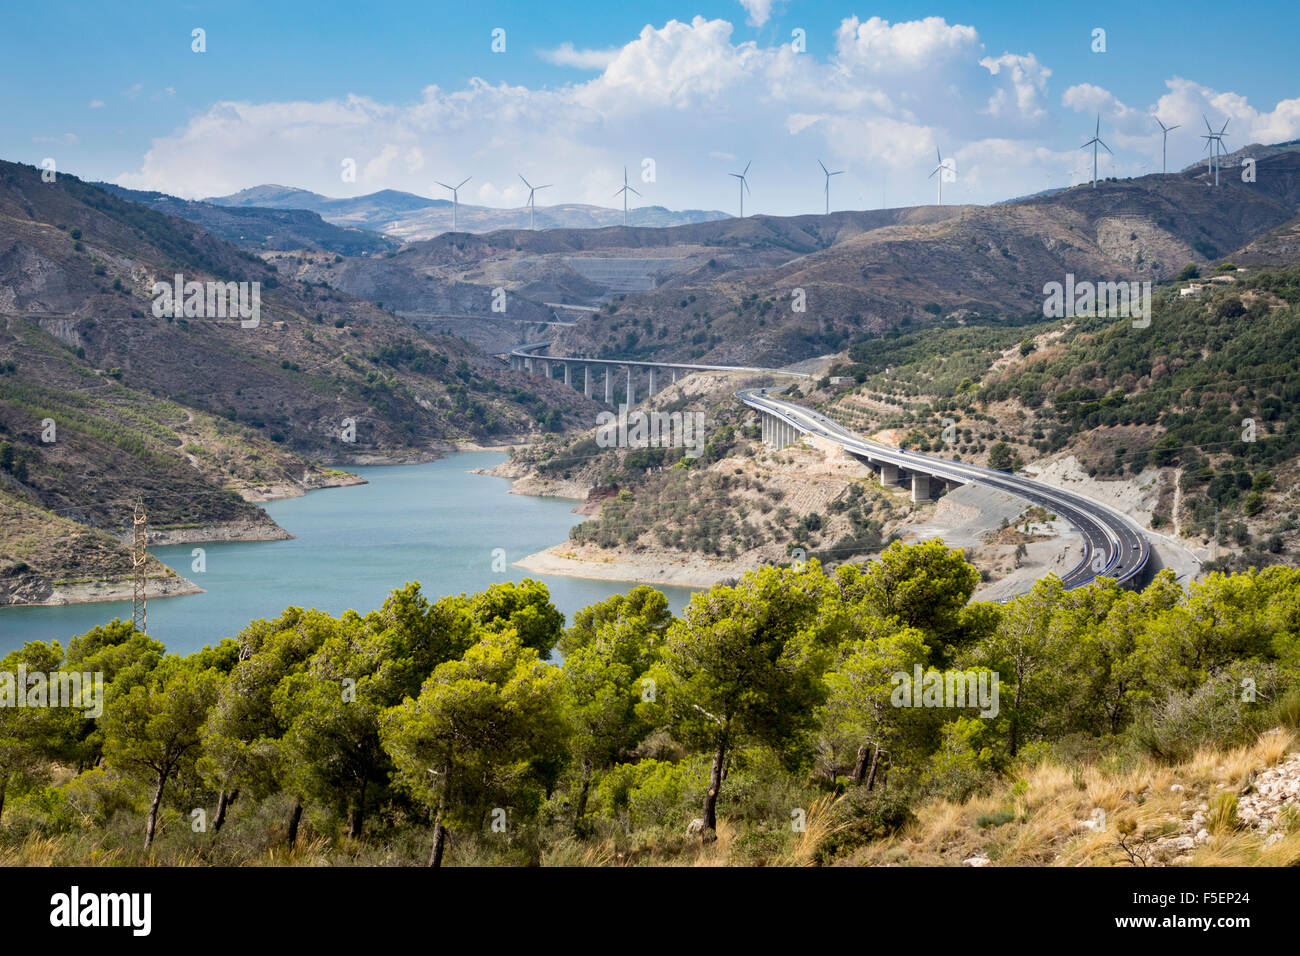 A44 motorway in the Sierra Nevada Mountains with Rules Reservoir and RIo Guadalfeo, Andalucia, Spain Stock Photo